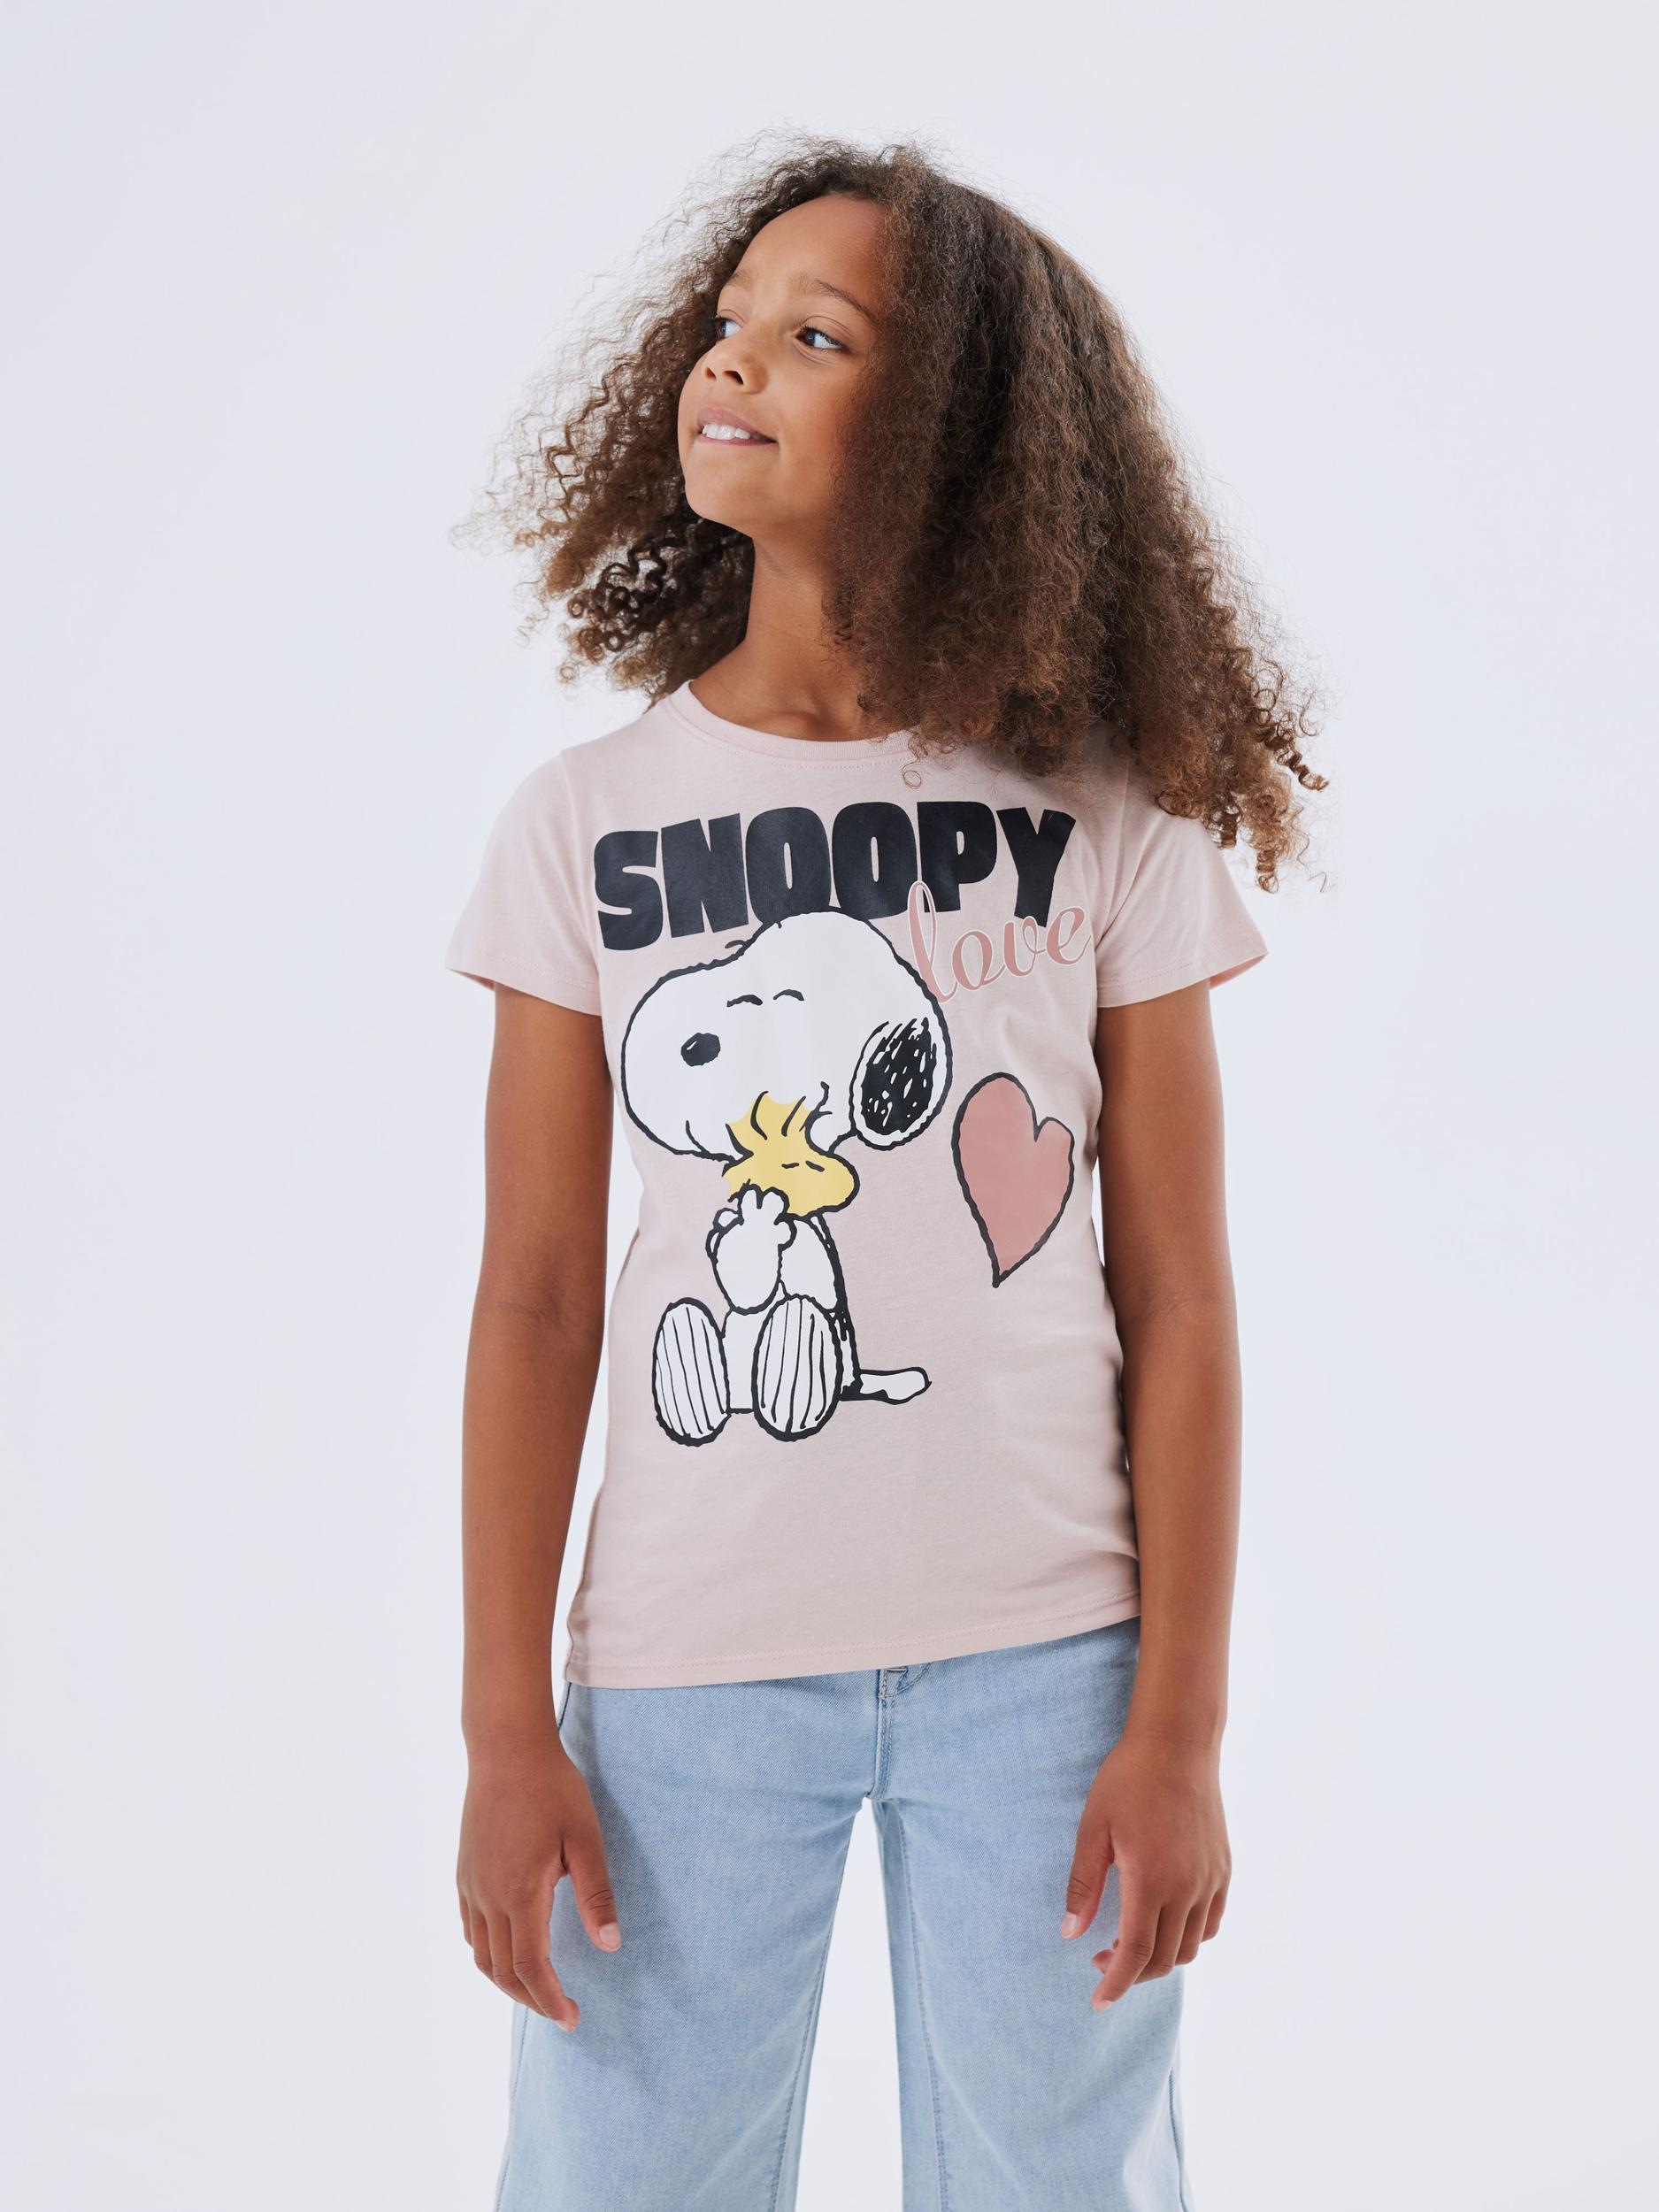 It NOOS T-Shirt TOP bei VDE« SNOOPY SS »NKFNANNI Name online